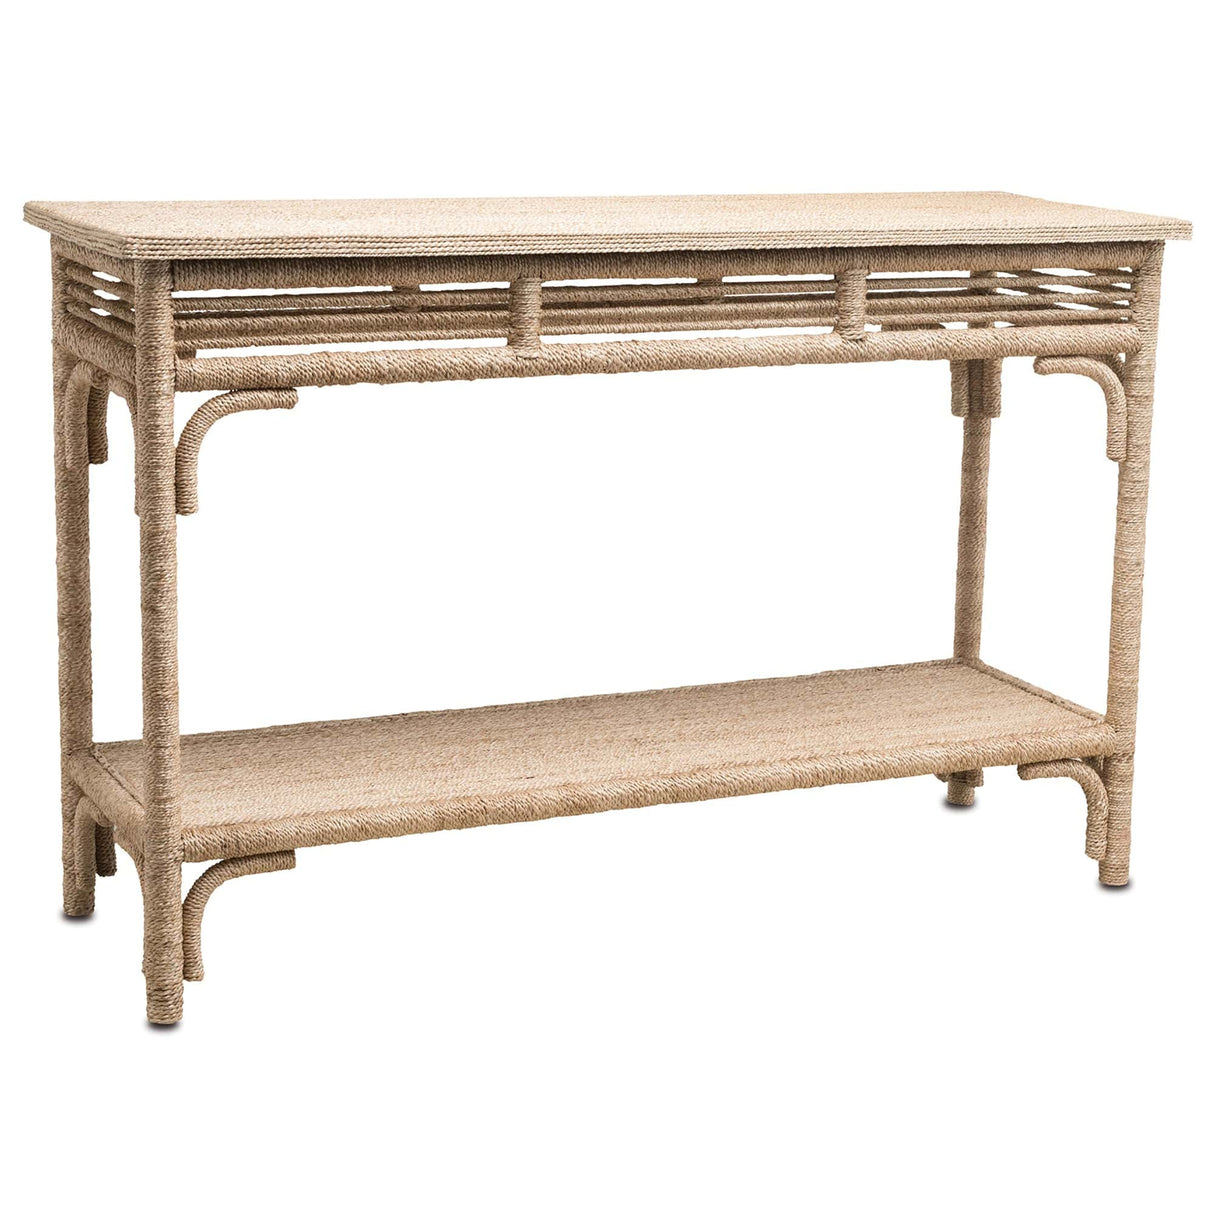 Currey & Company Olisa Large Rope Console Table Tables currey-co-3000-0246 633306001329